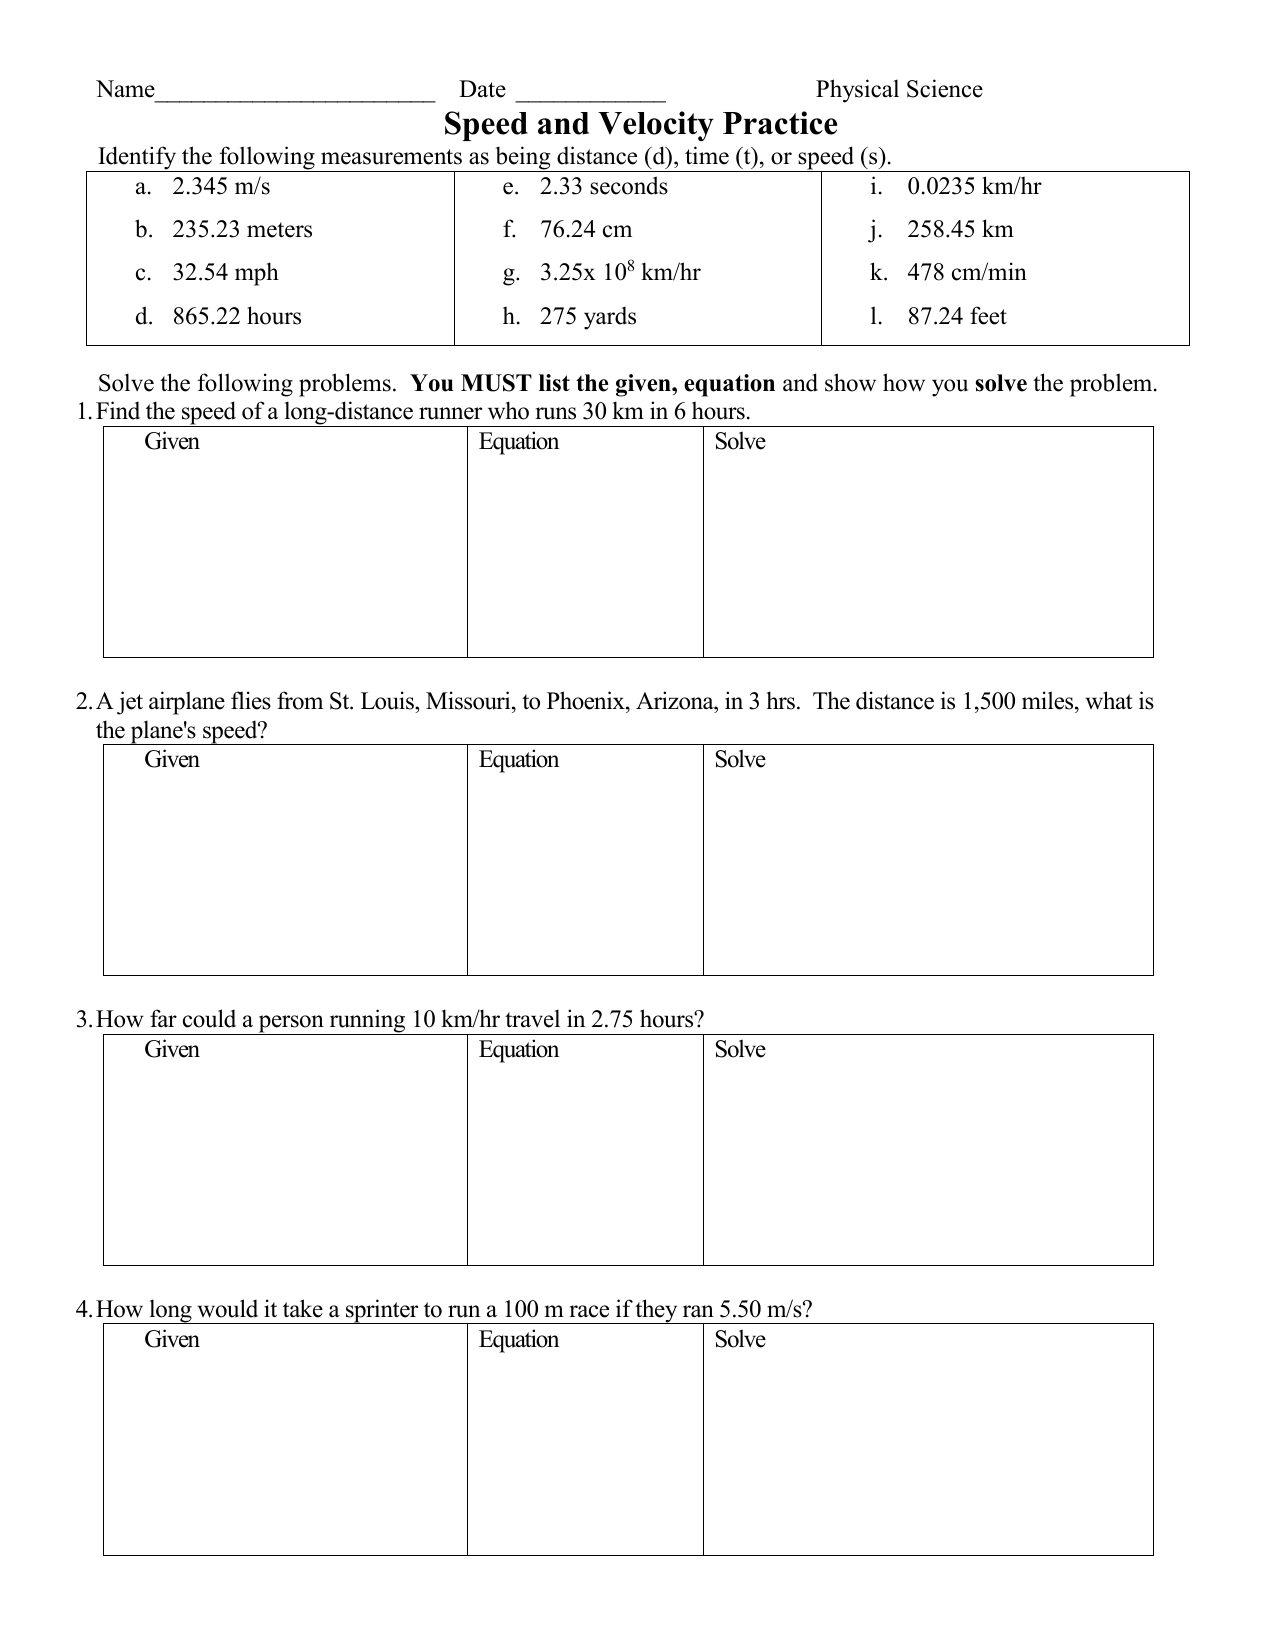 Speed and Velocity Practice Problems For Speed Problem Worksheet Answers